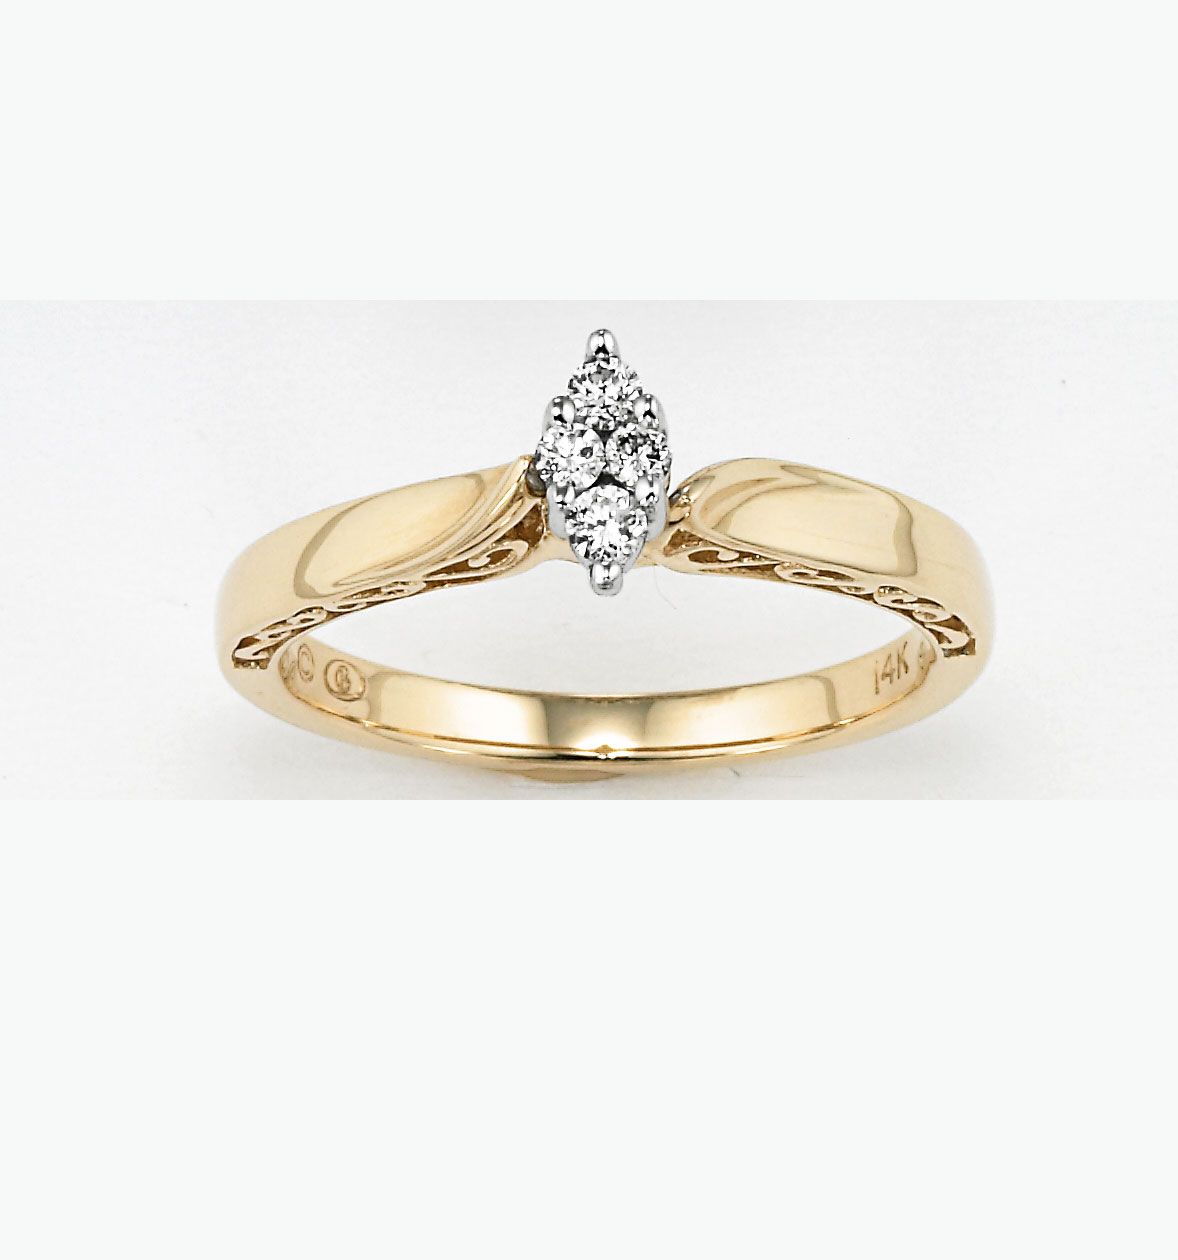 Orange Blossom 1/10 cttw Miracle Marquise Diamond Ring